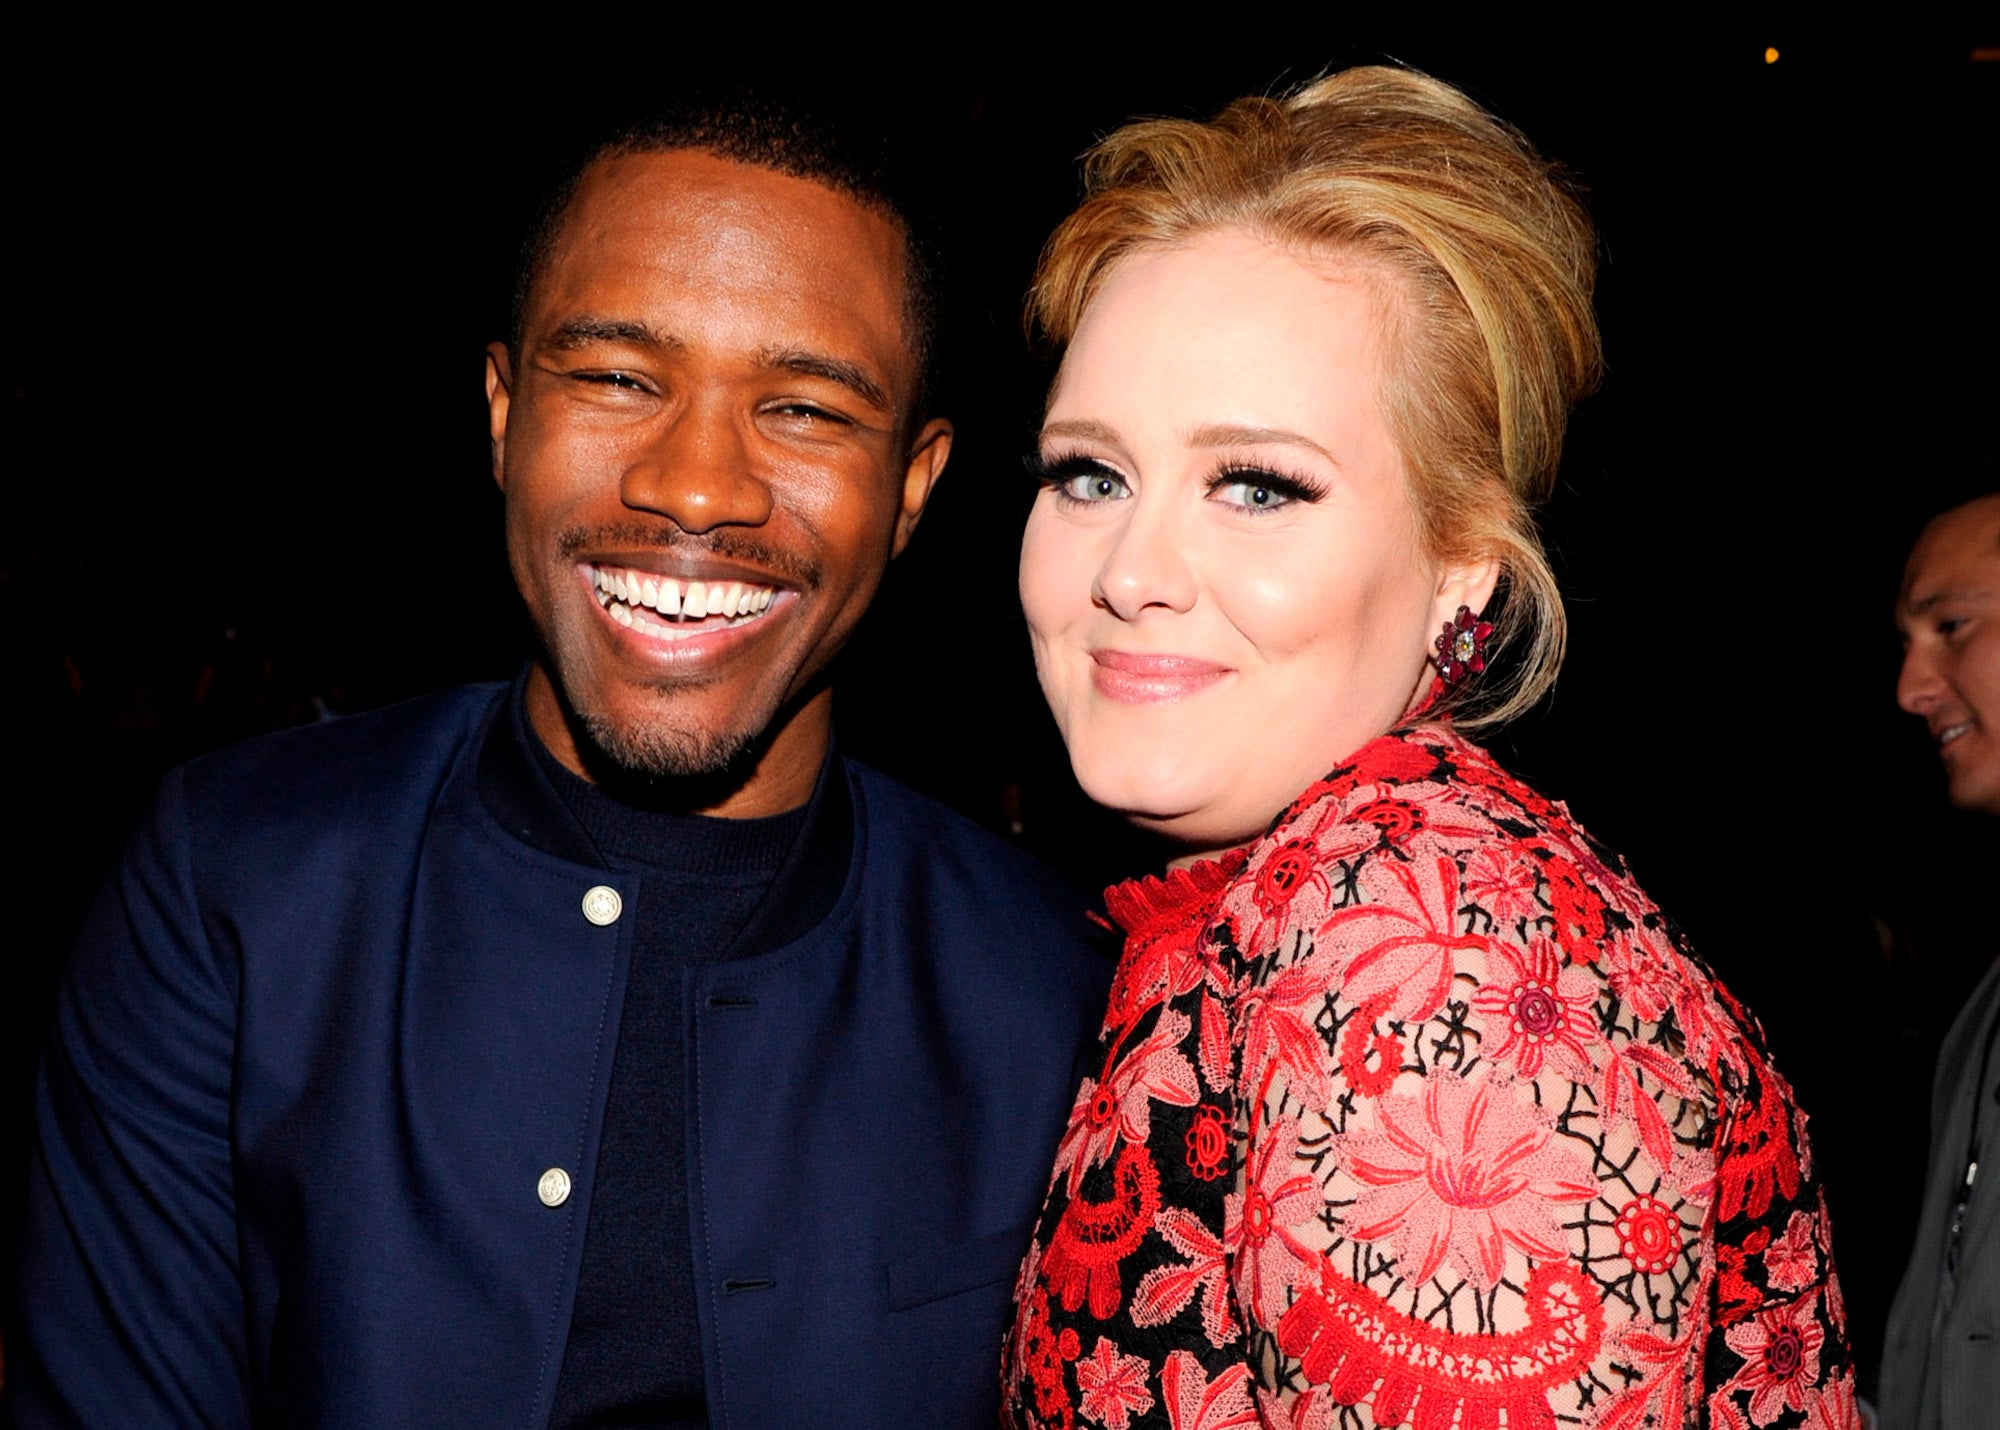 Frank Ocean and Adele attend the 55th Annual GRAMMY Awards in Los Angeles.